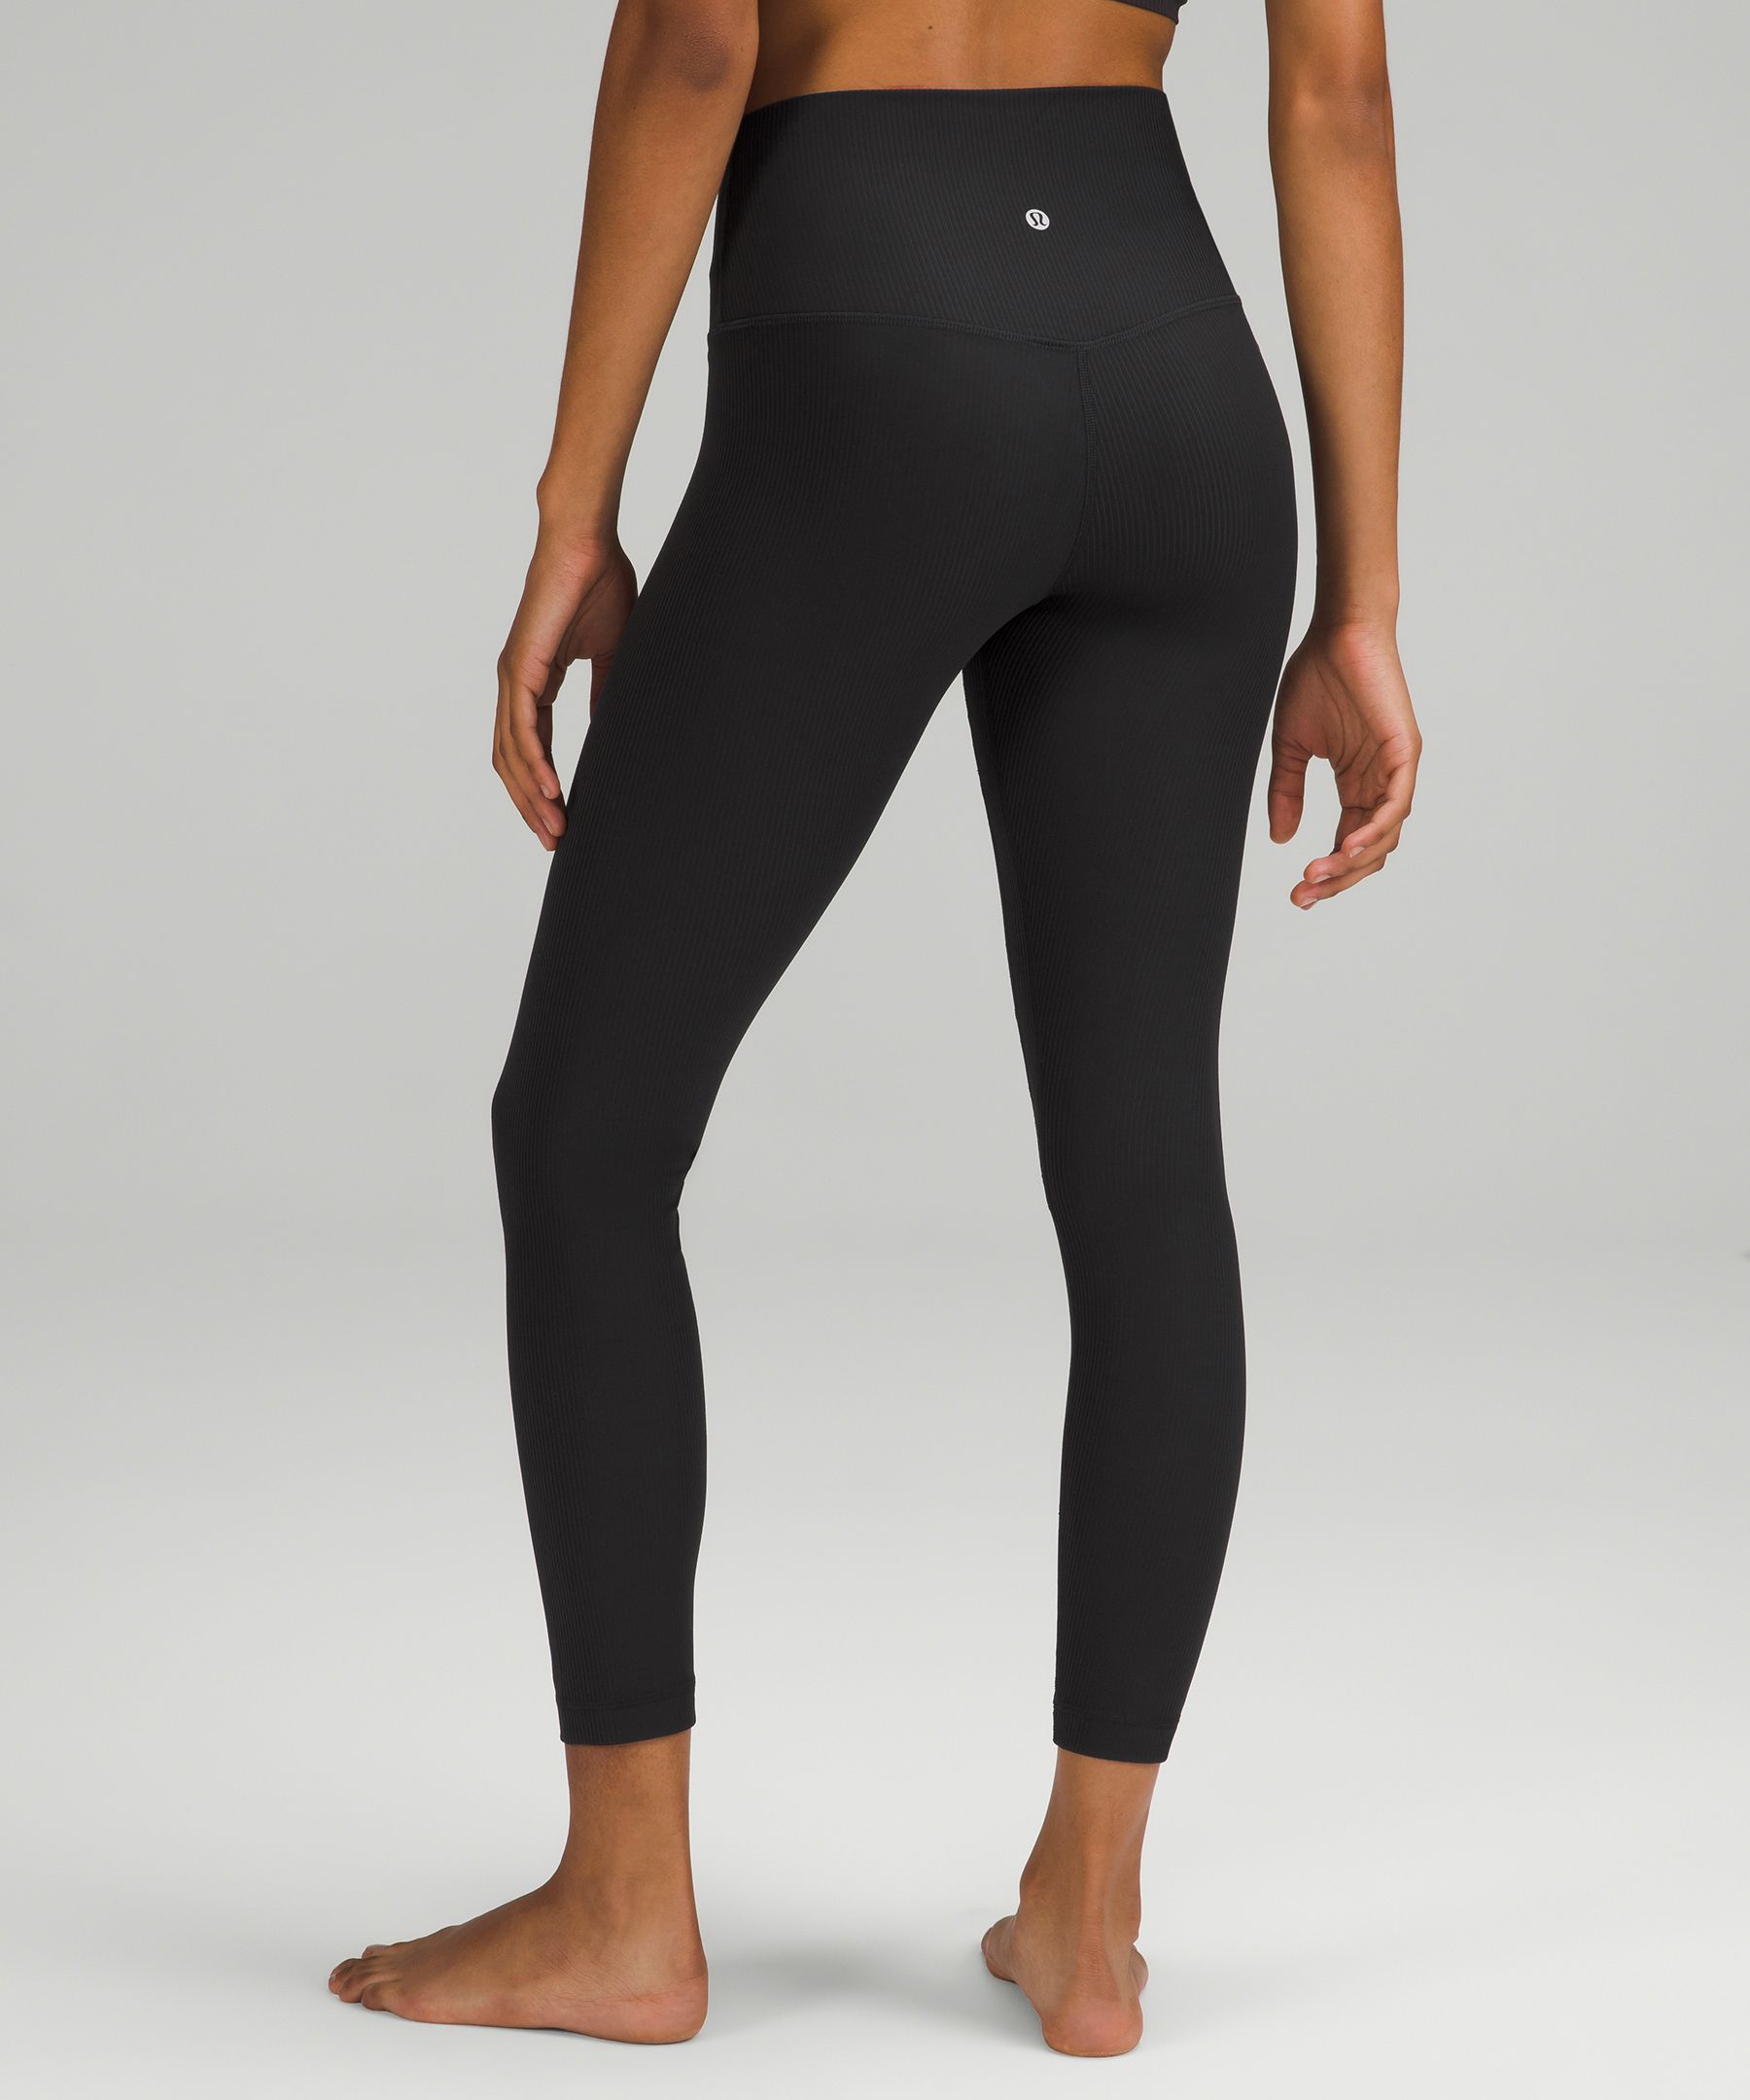 Lululemon Align Ribbed 25” Red Size 10 - $55 (53% Off Retail) New With Tags  - From Karen